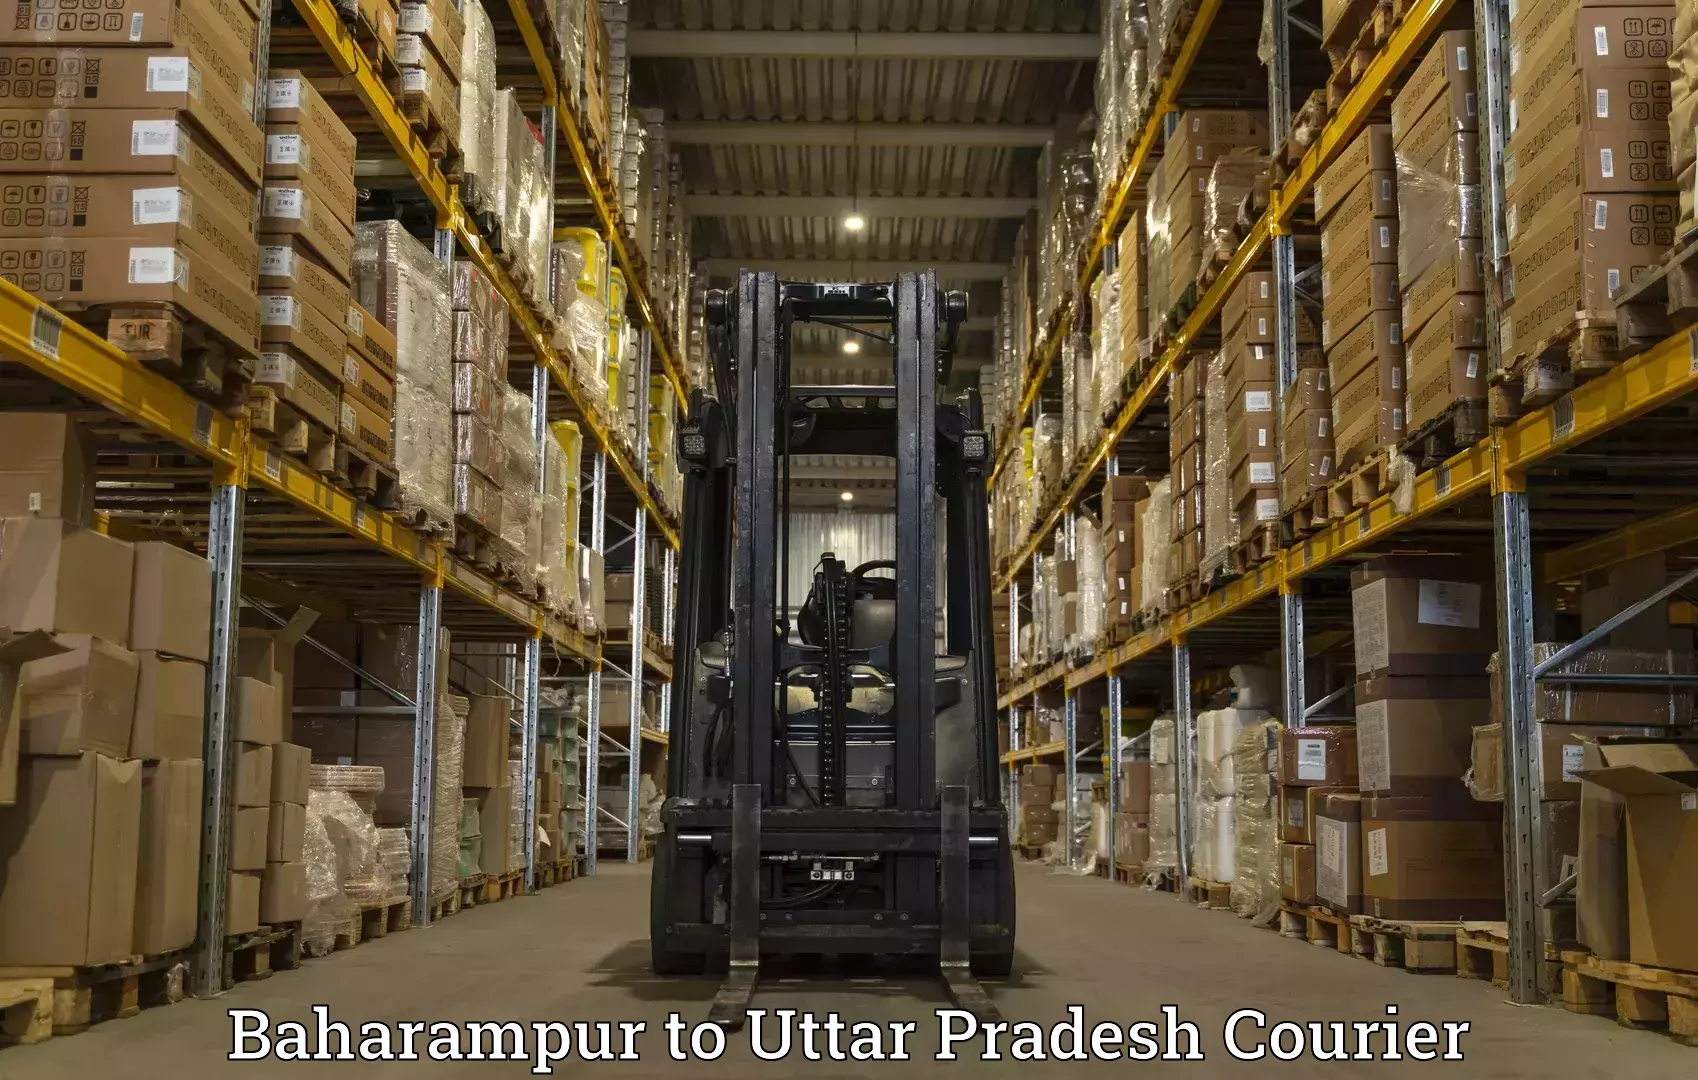 Courier app Baharampur to Agra